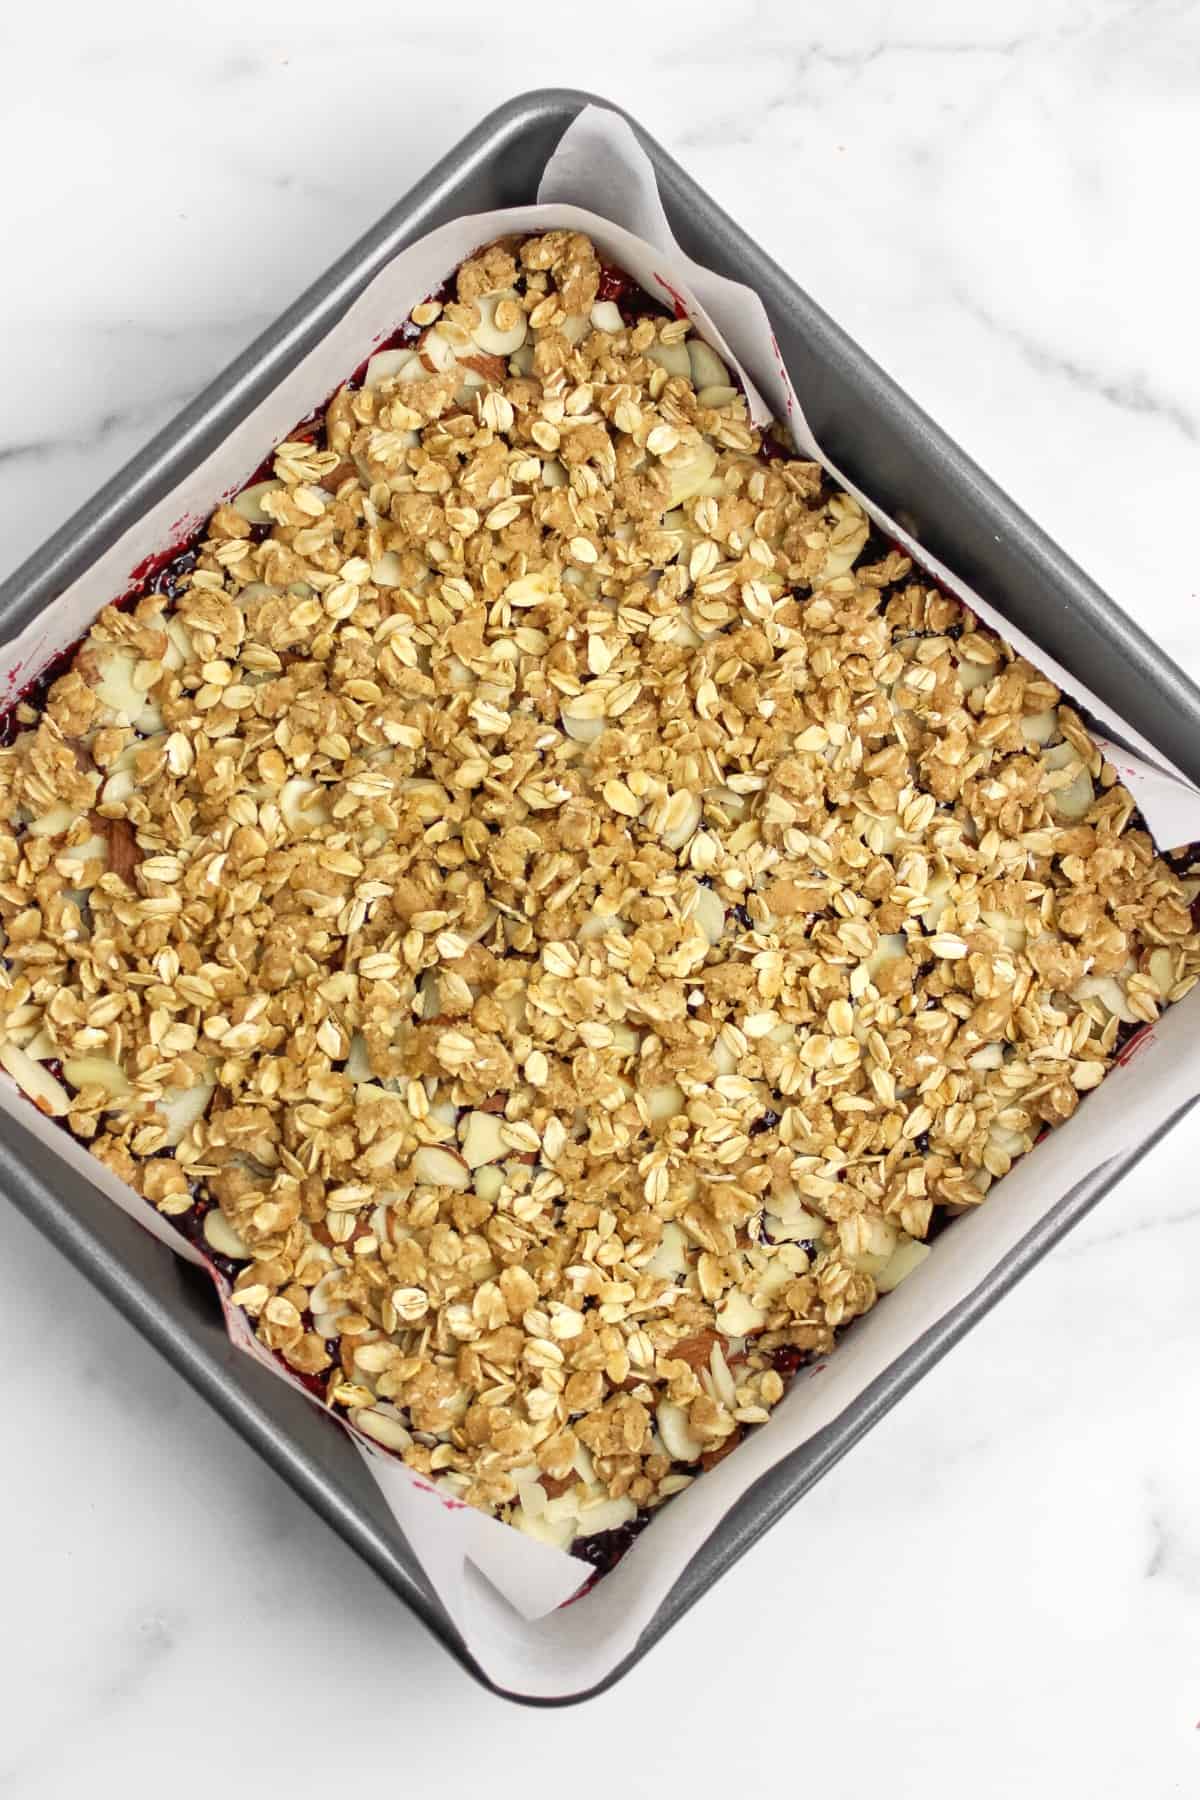 Raspberry oatmeal bars about to be baked.